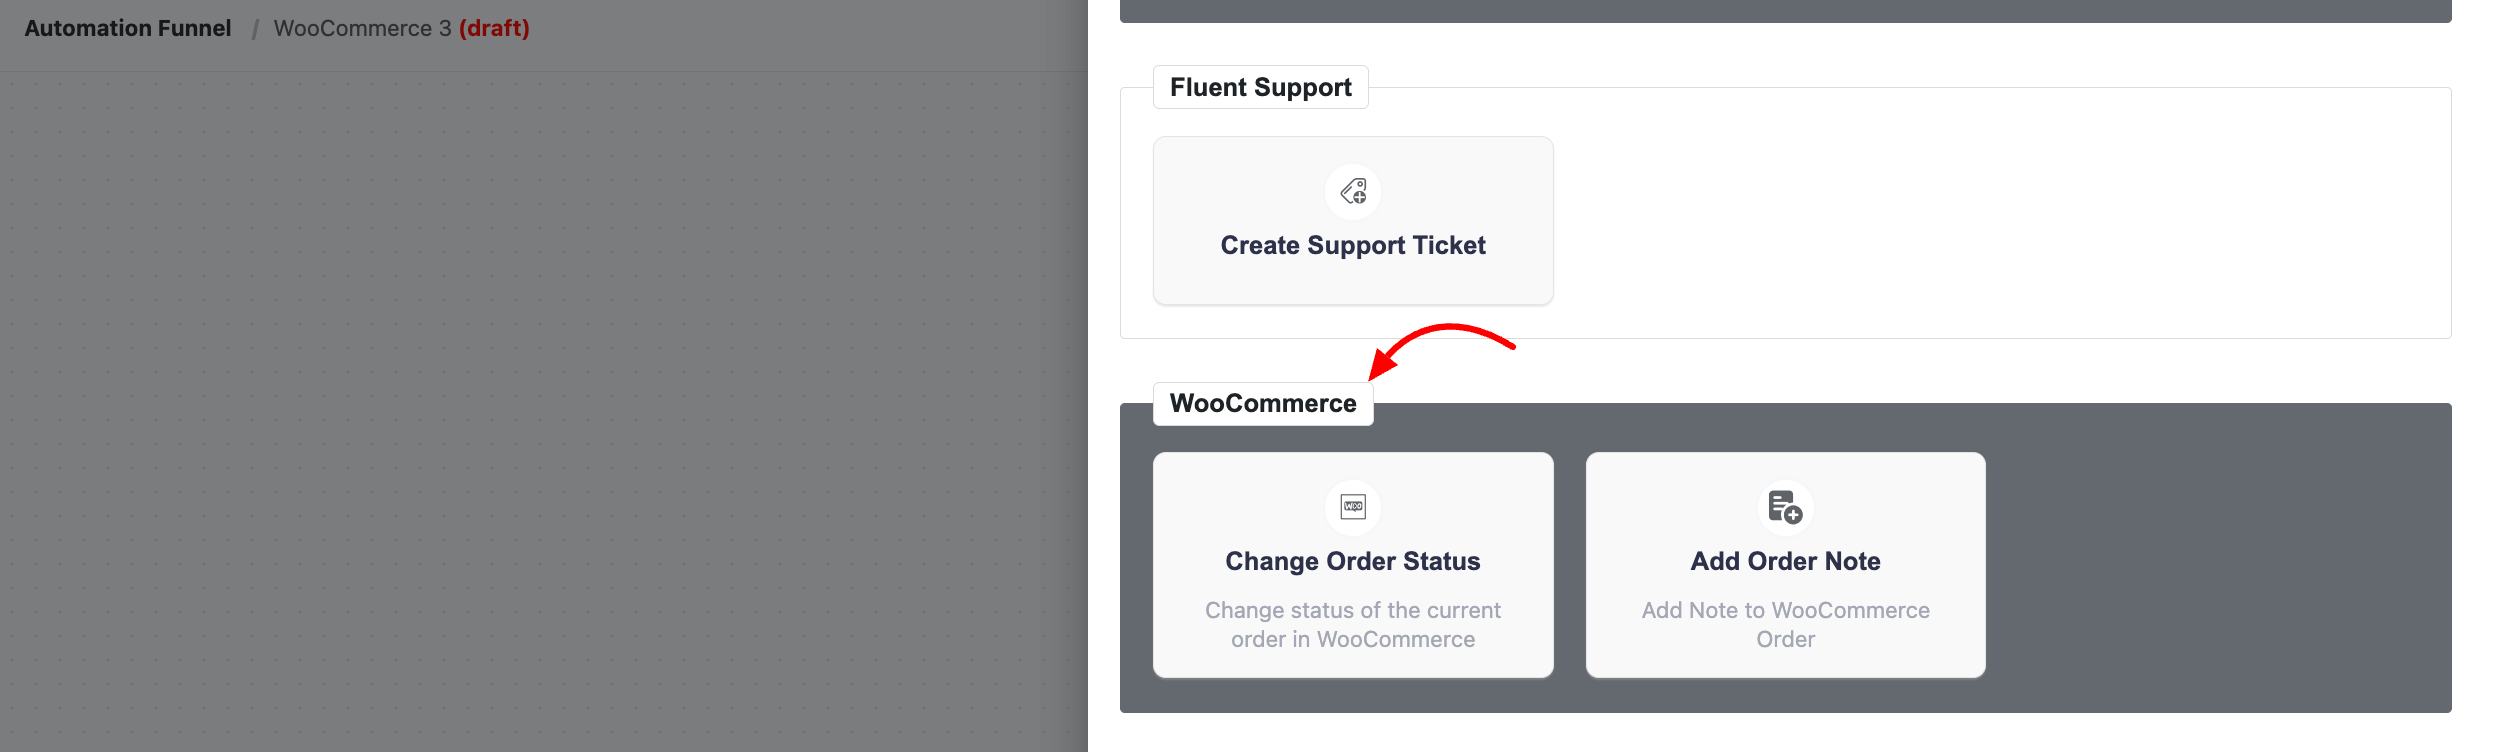 woocommerce action for triggers 